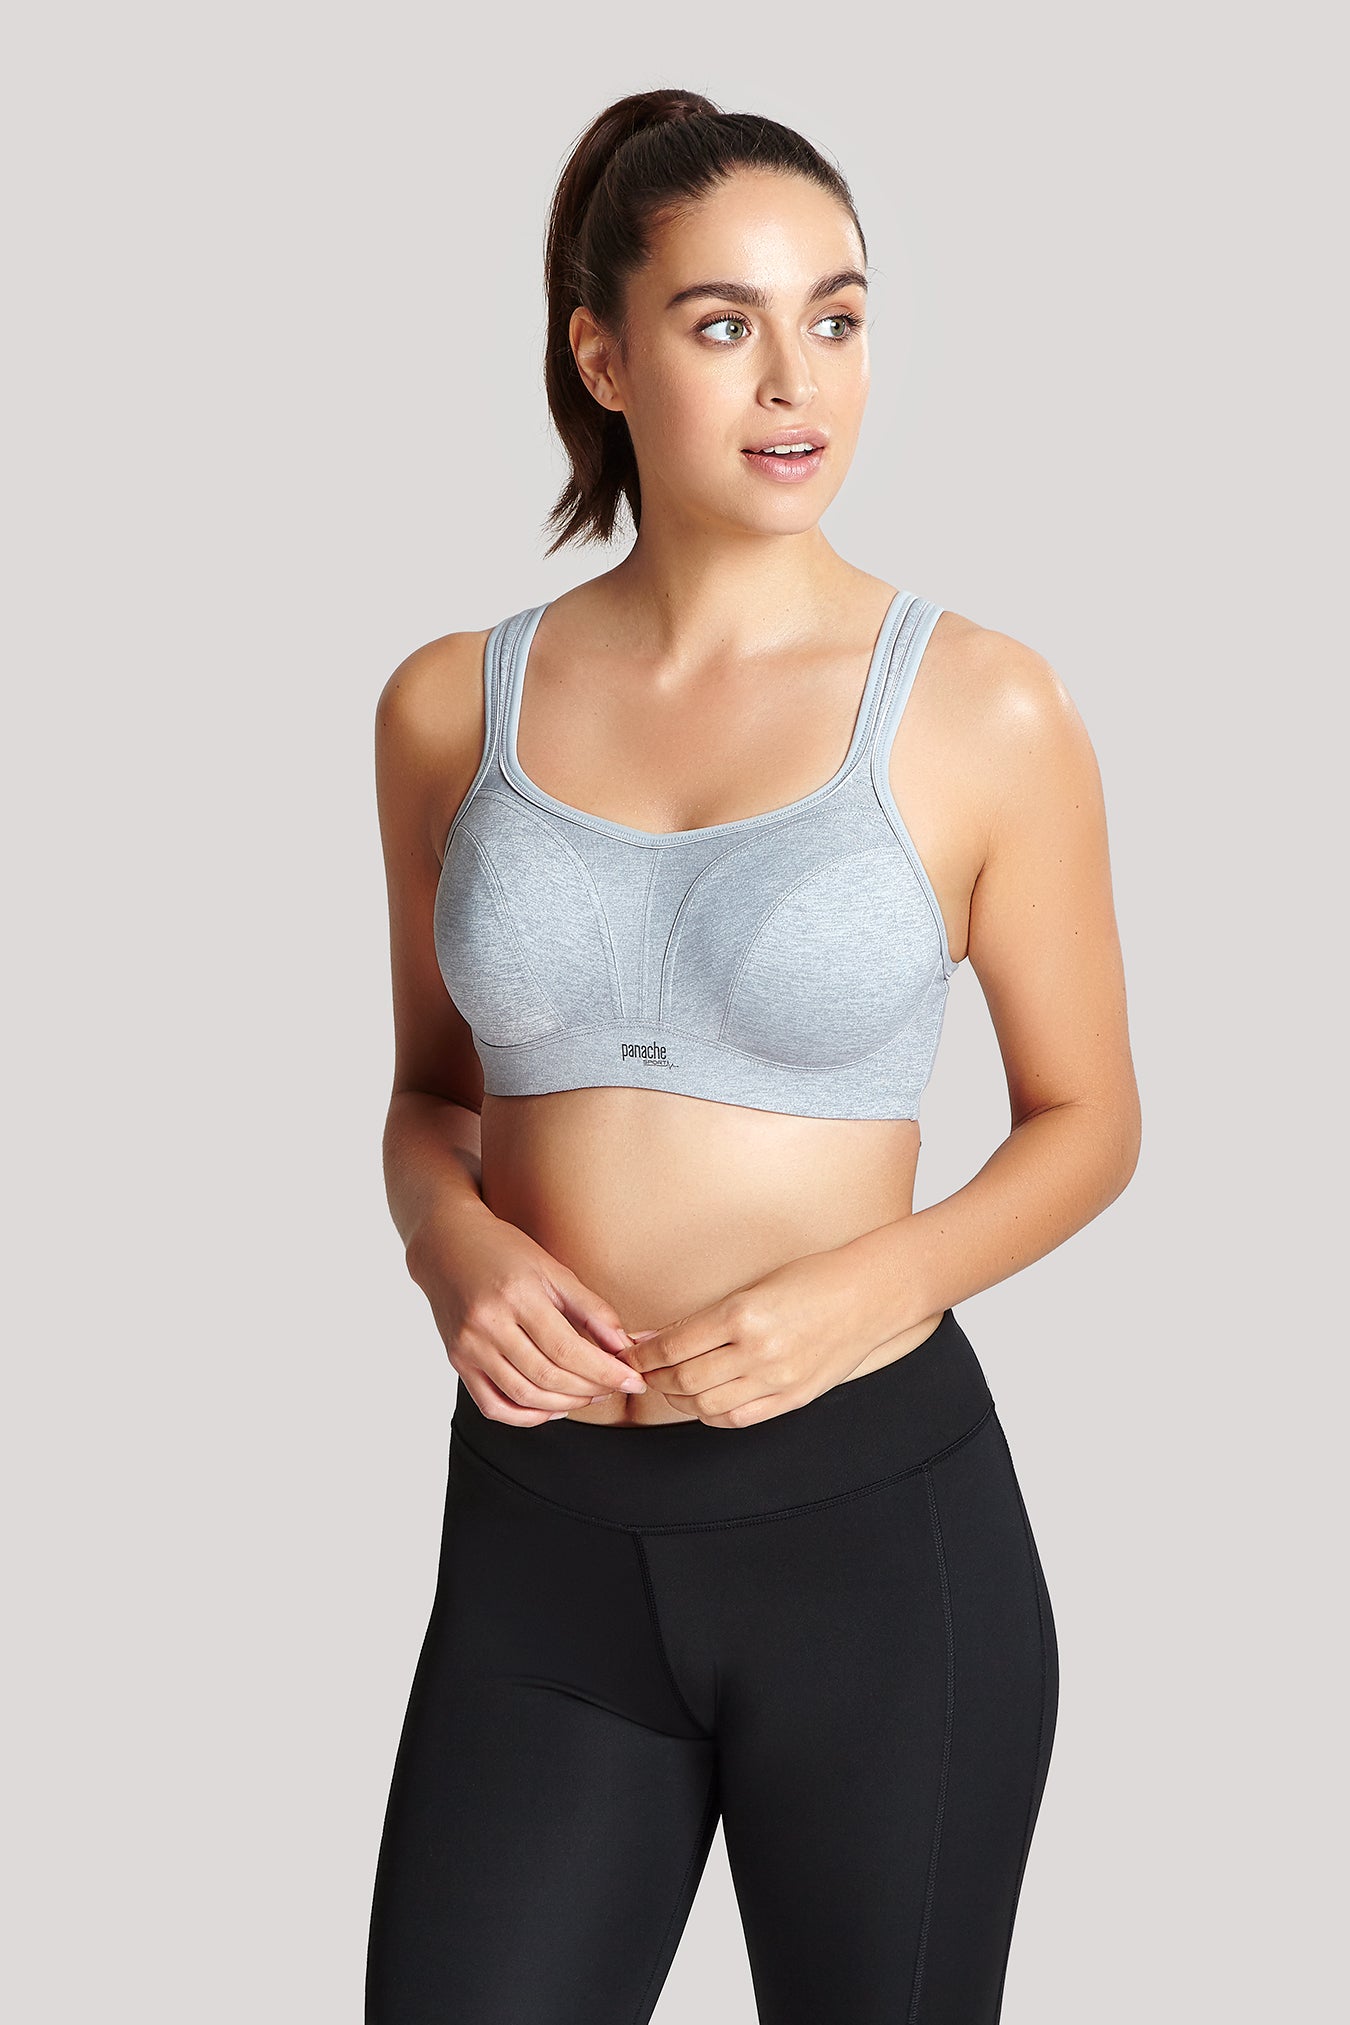 Panache Classic Underwired Sports Bra Marled Grey – Curvaceous Lingerie